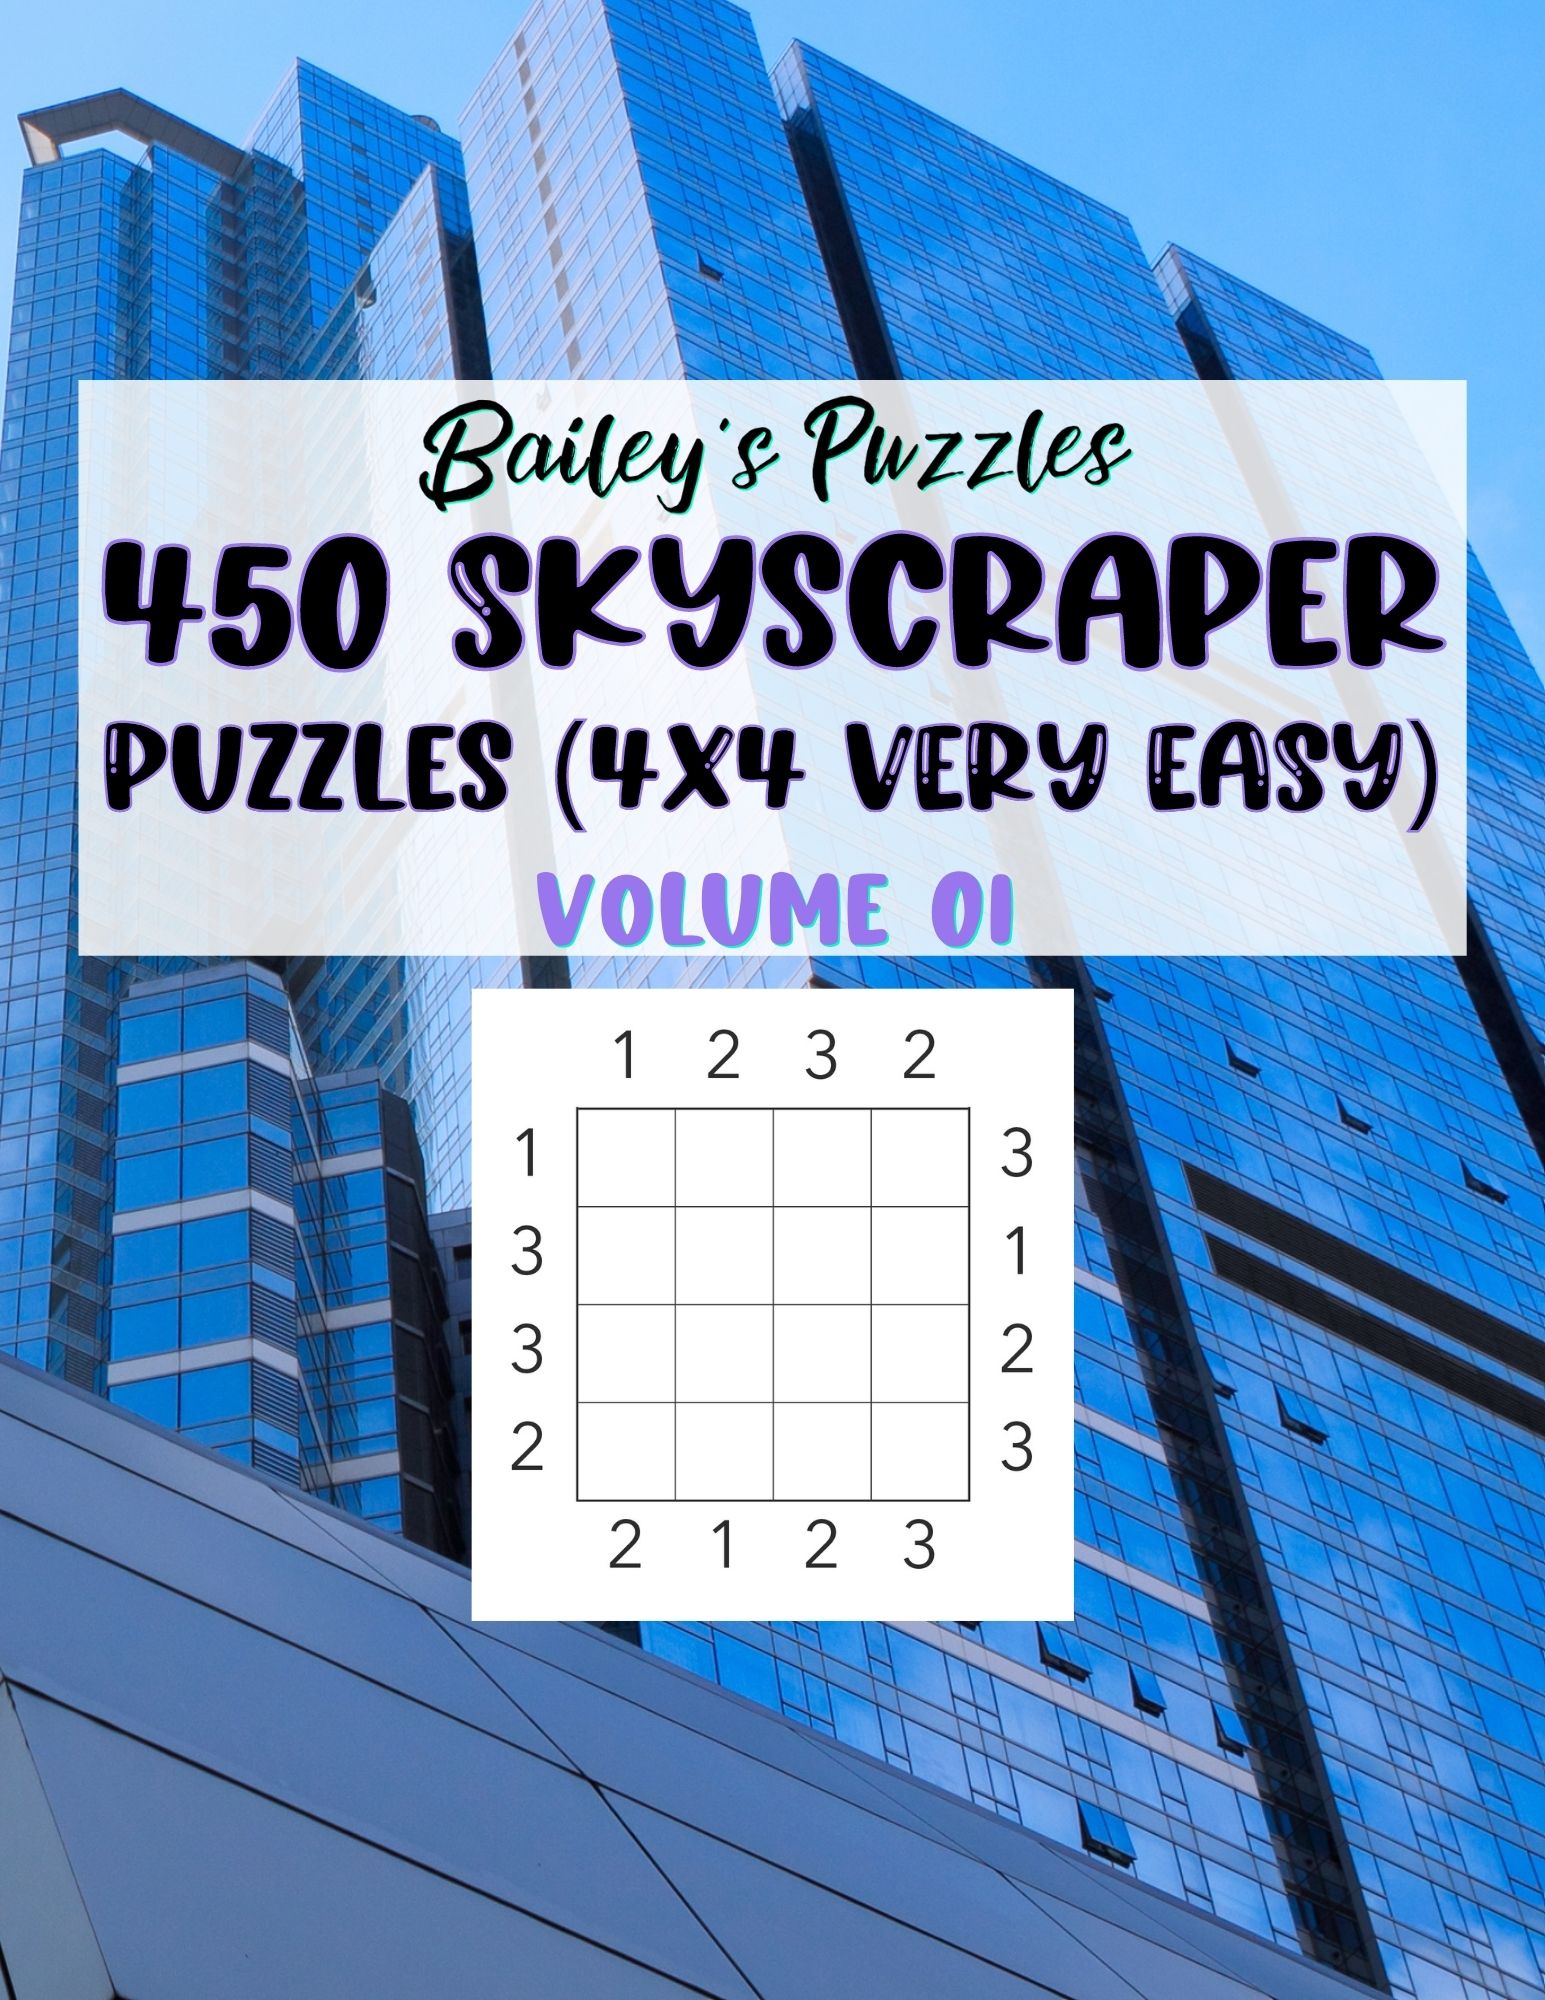 Front Cover - 450 Skyscraper Puzzles (4x4, very easy)